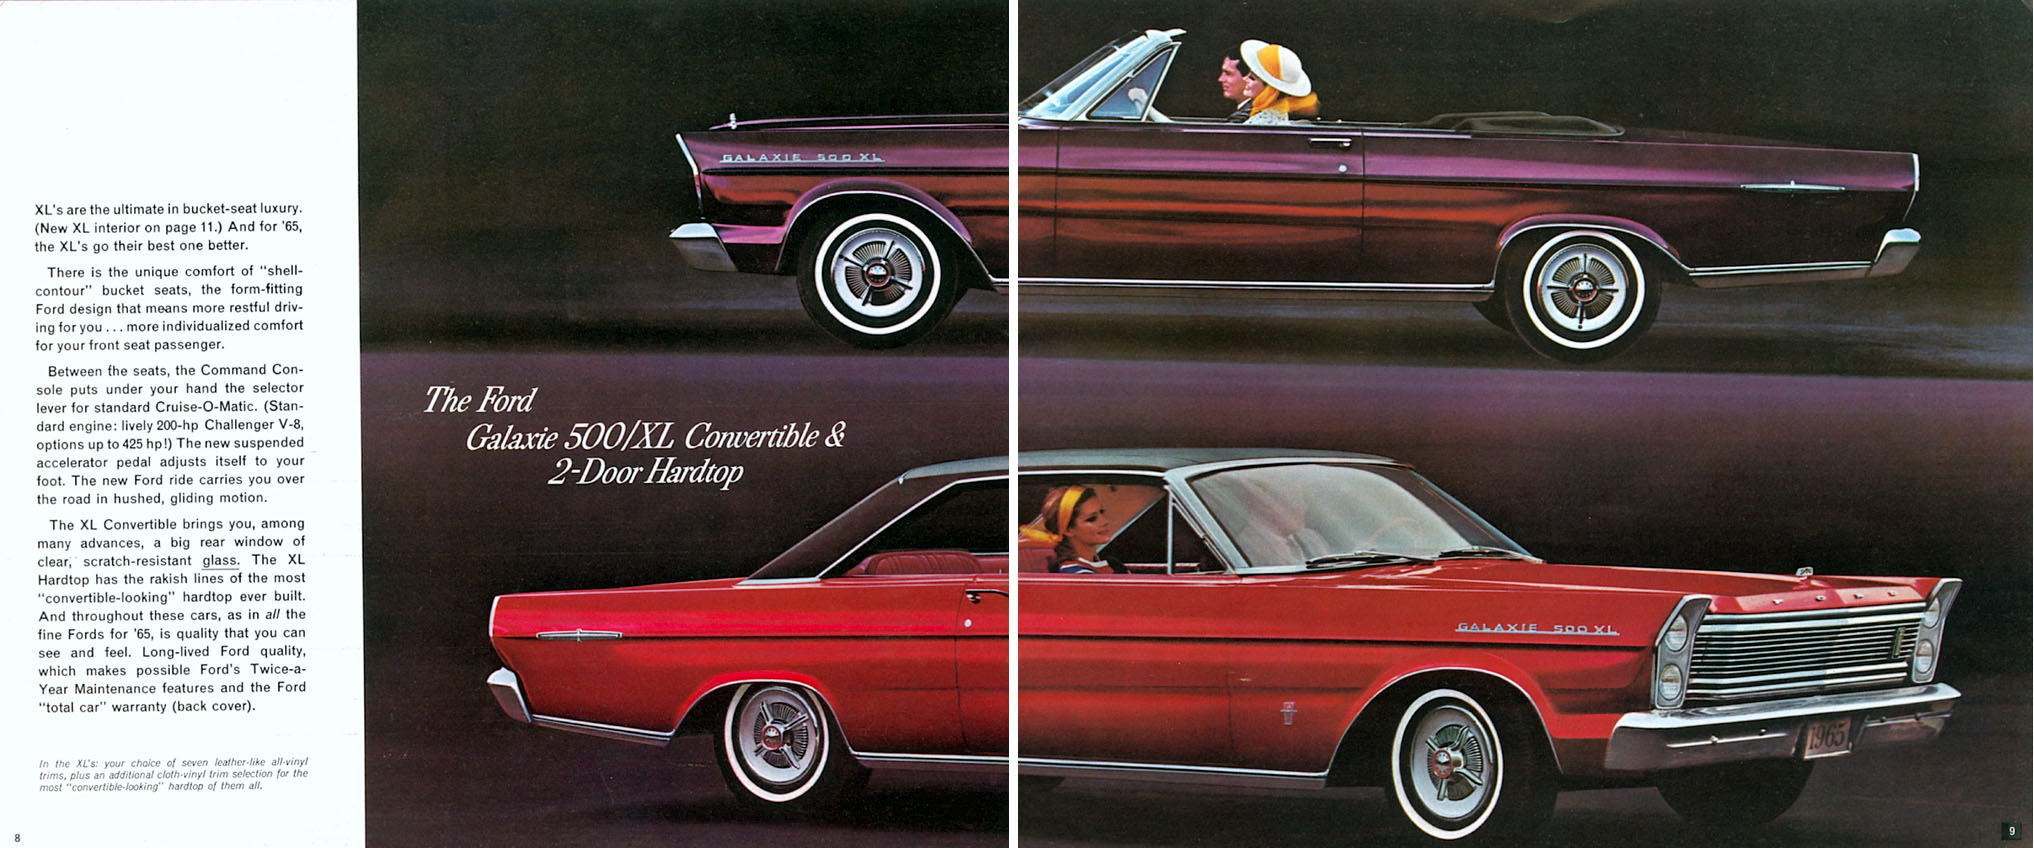 1965 Ford Brochure Page 1